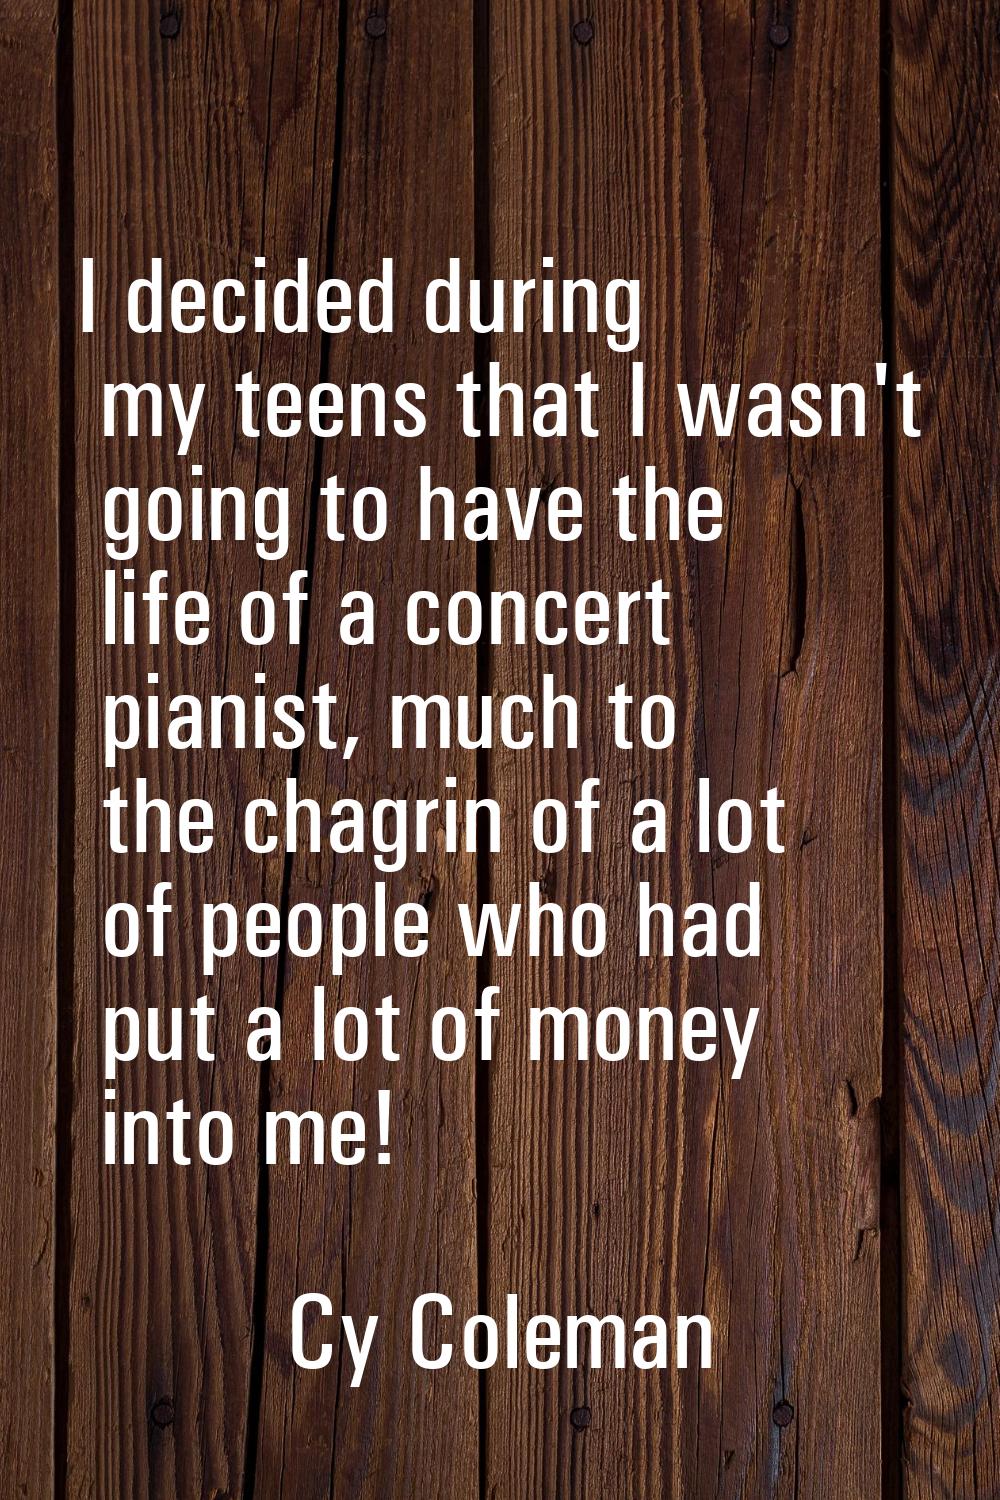 I decided during my teens that I wasn't going to have the life of a concert pianist, much to the ch